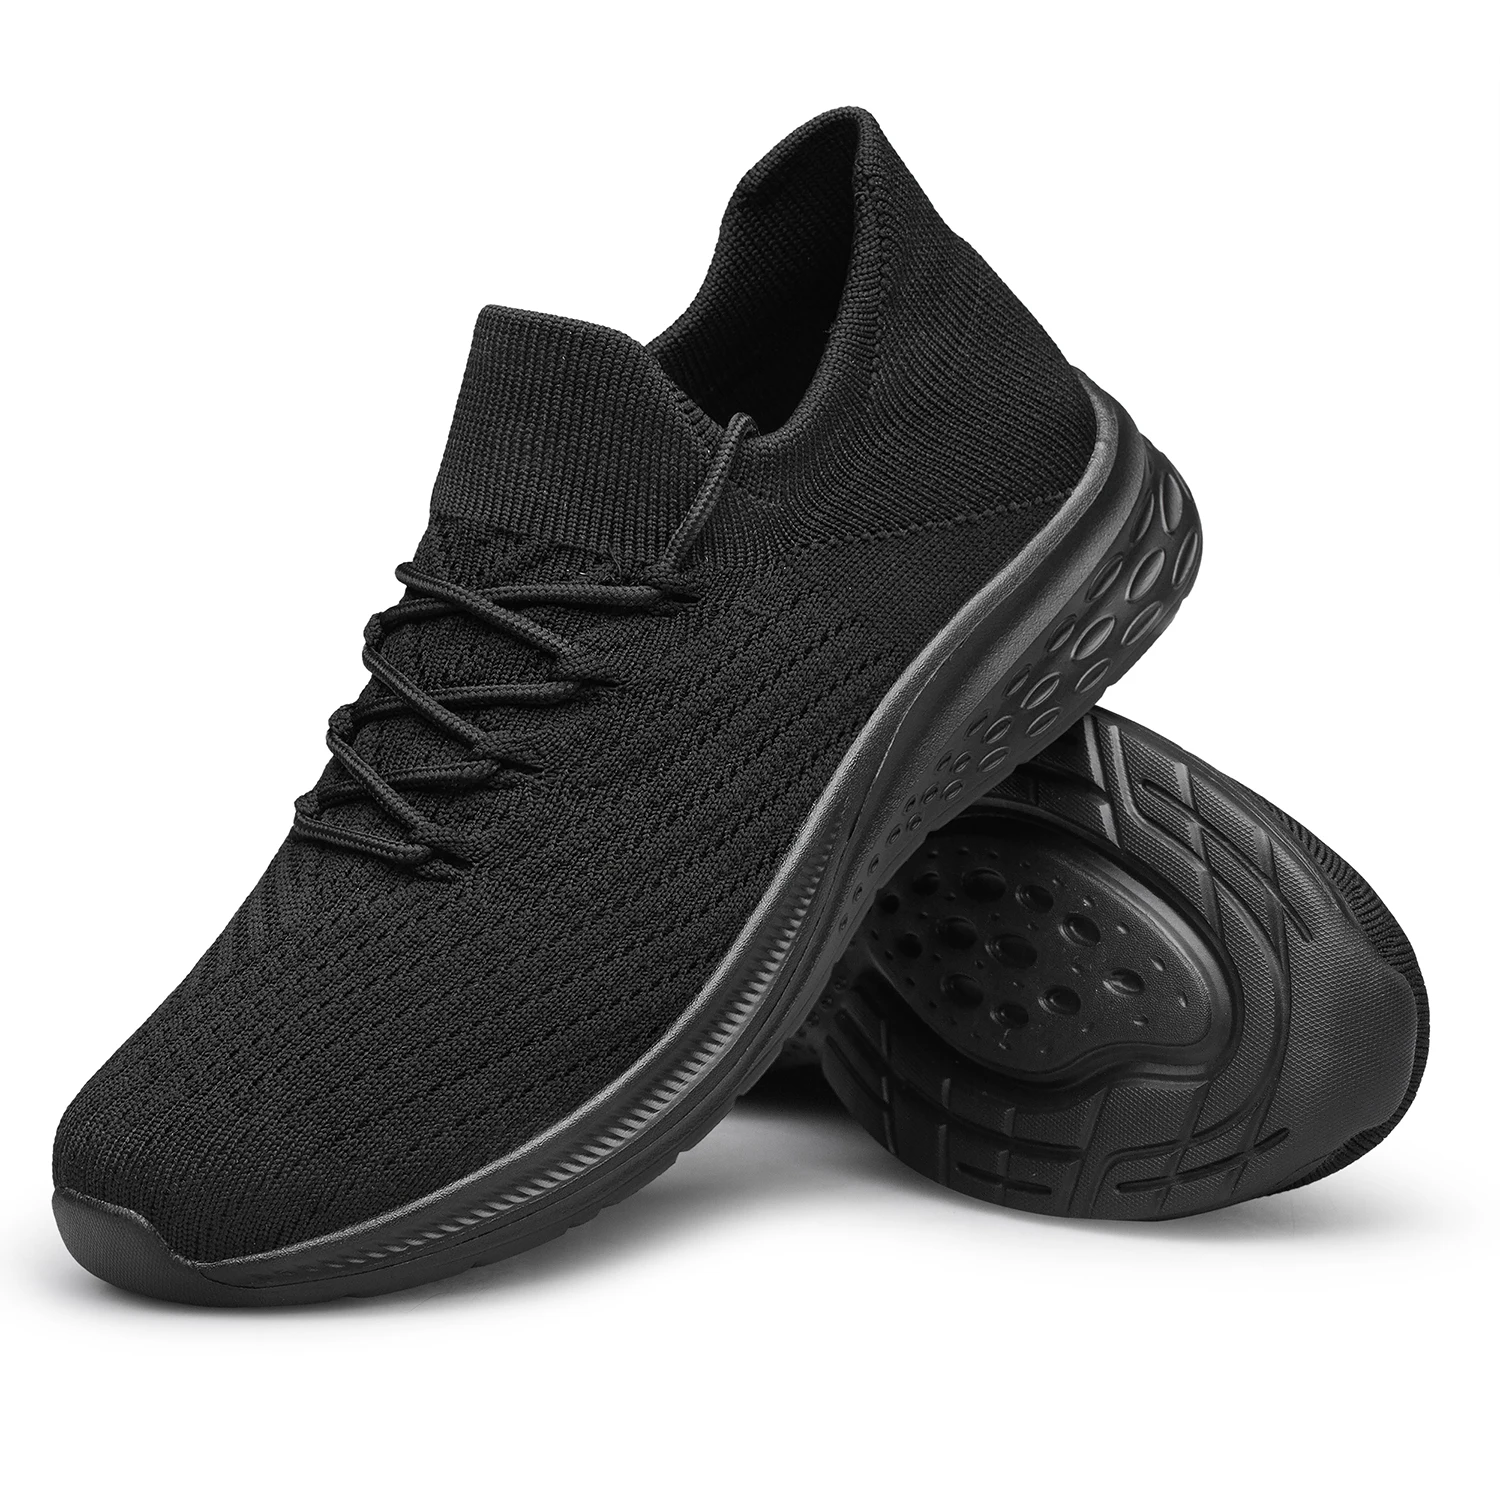 

Men's Casual Sneaker Lace-up Breathable Shoes Lightweight Mesh Flats Anti-Slip Jogging Athletic Damping Big Size